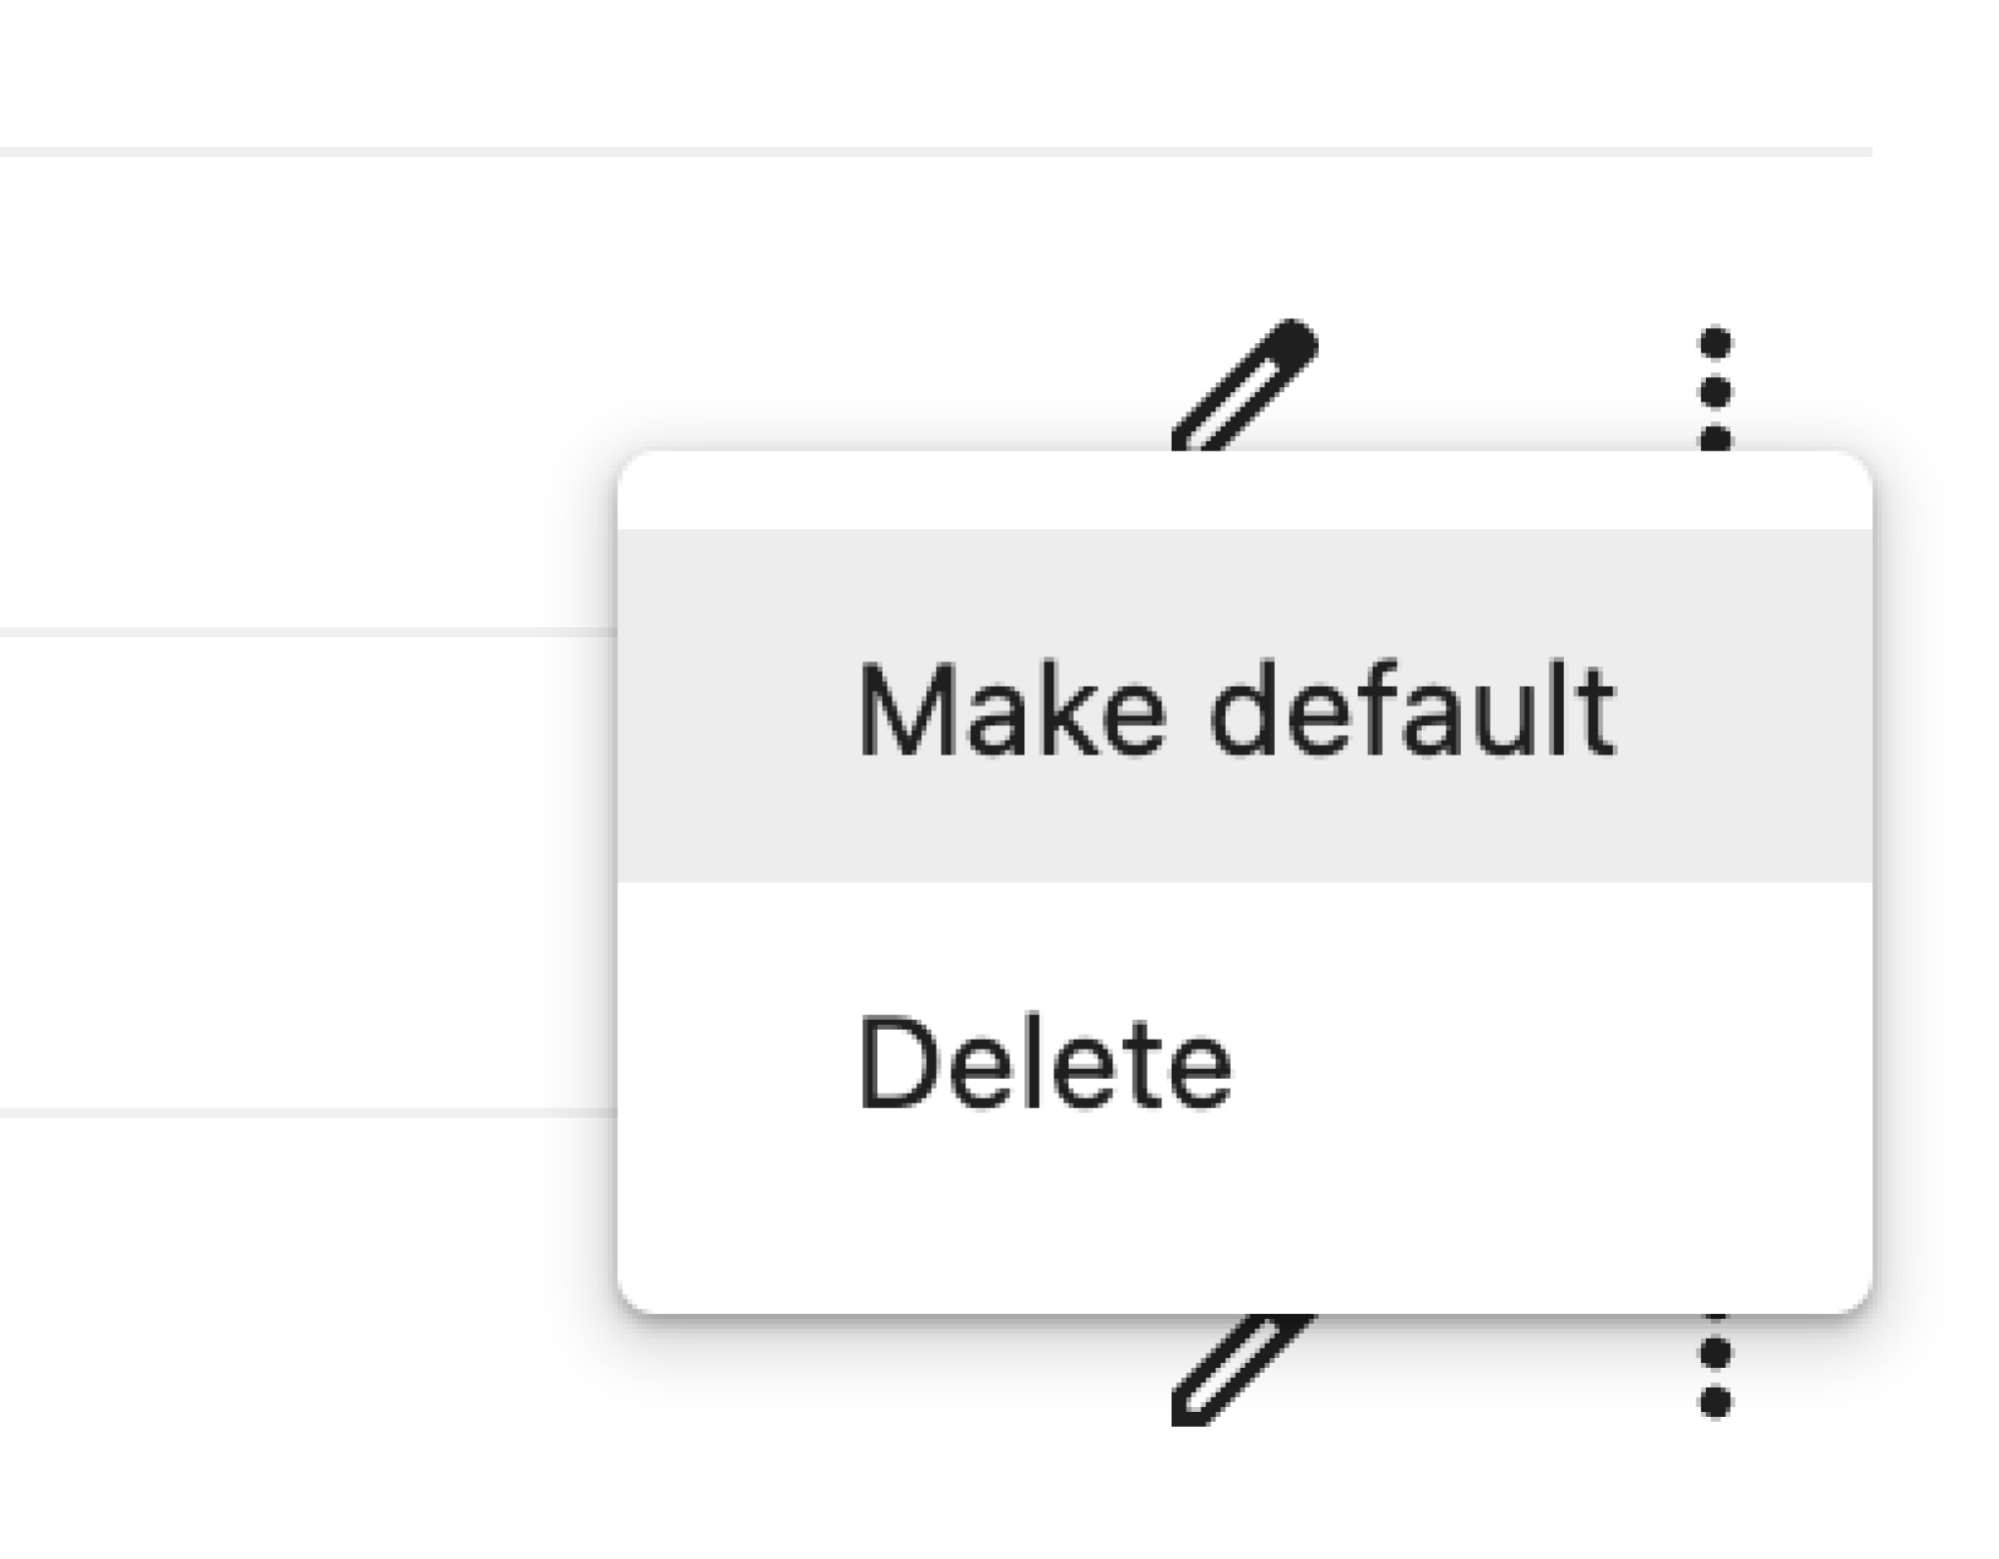 The text "Make default" highlighted